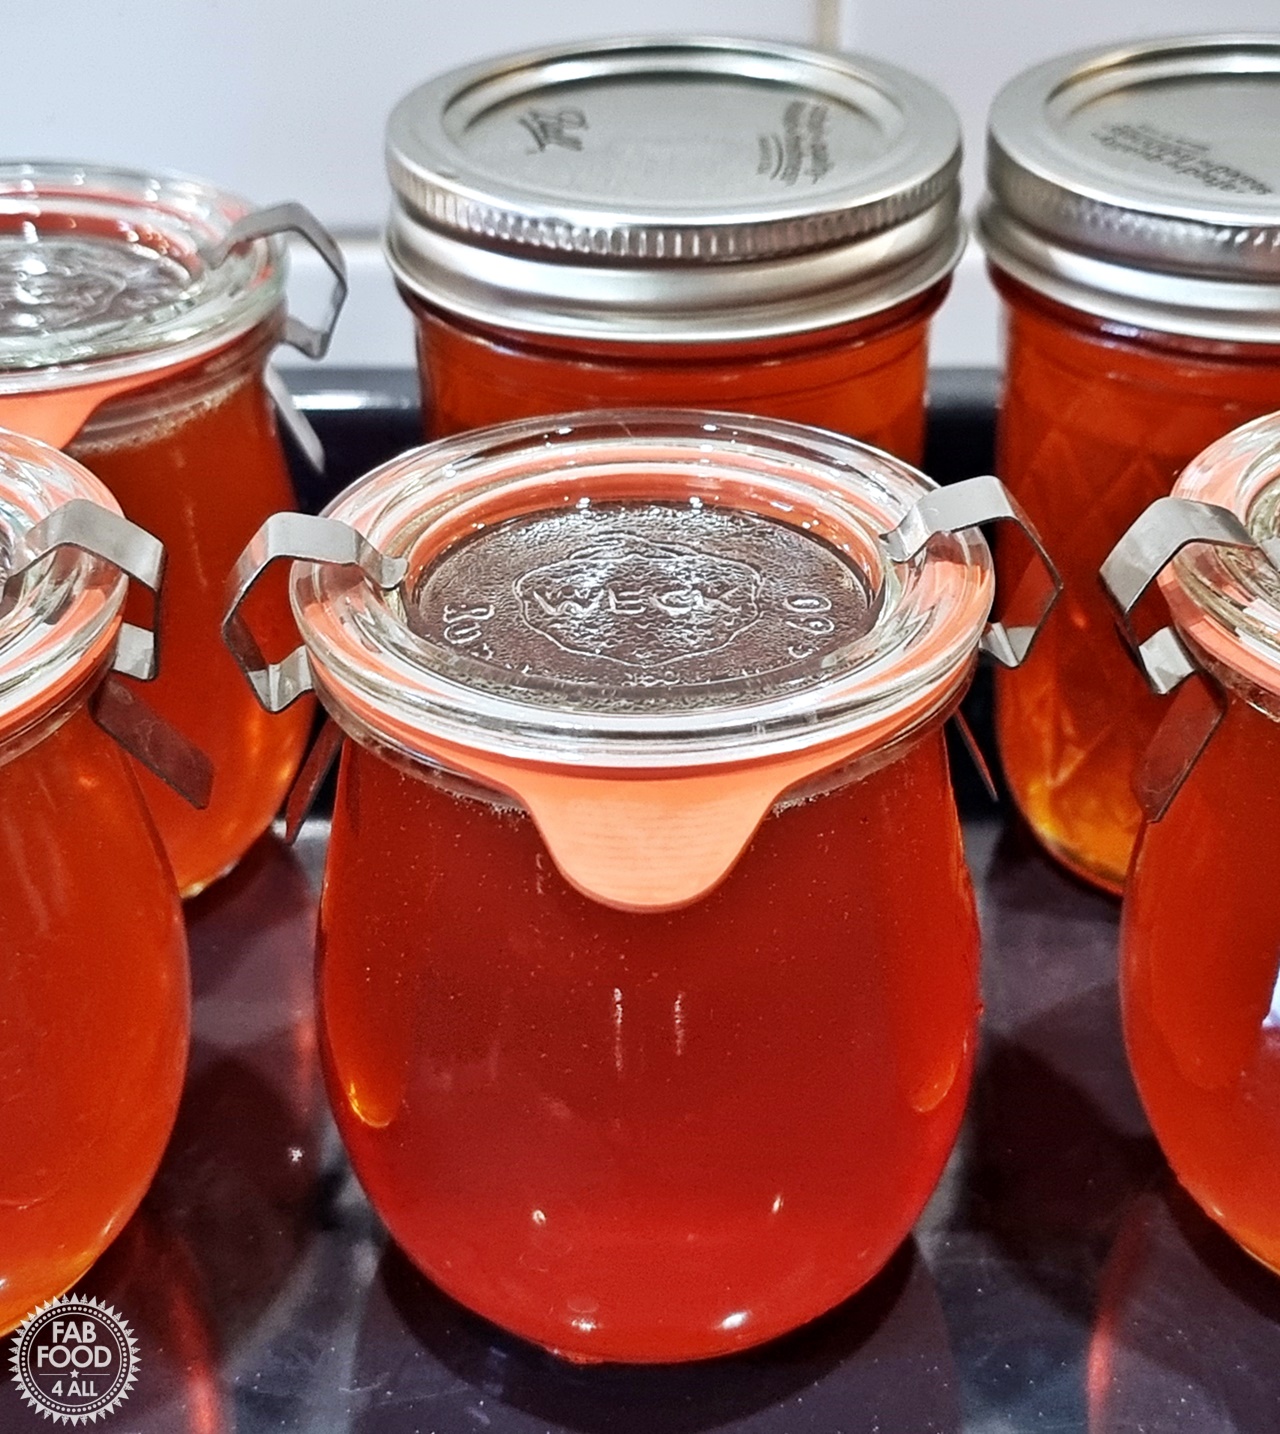 Potted up jars of Rosehip and Jelly with lids on.